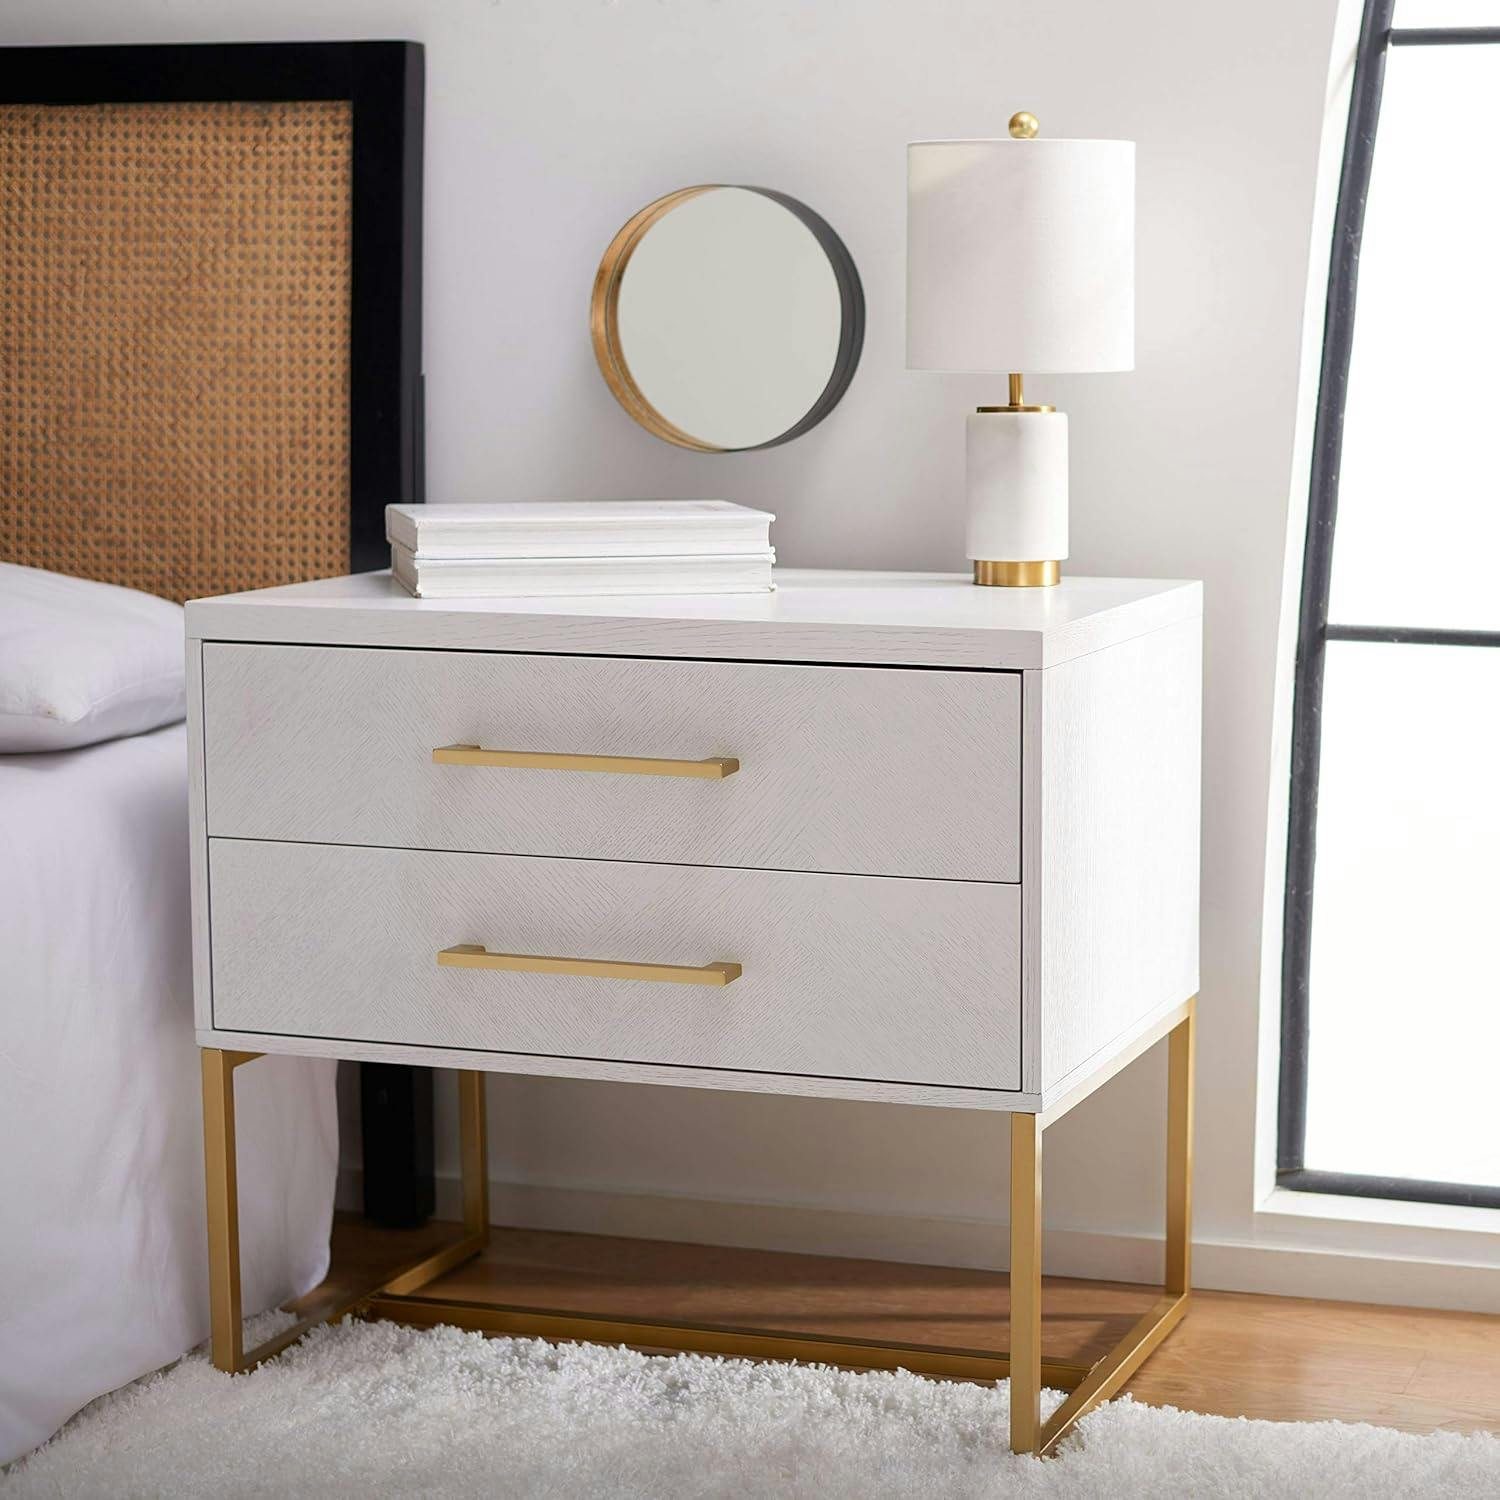 Estelle 36" White Contemporary 2-Drawer Nightstand with Brass Accents